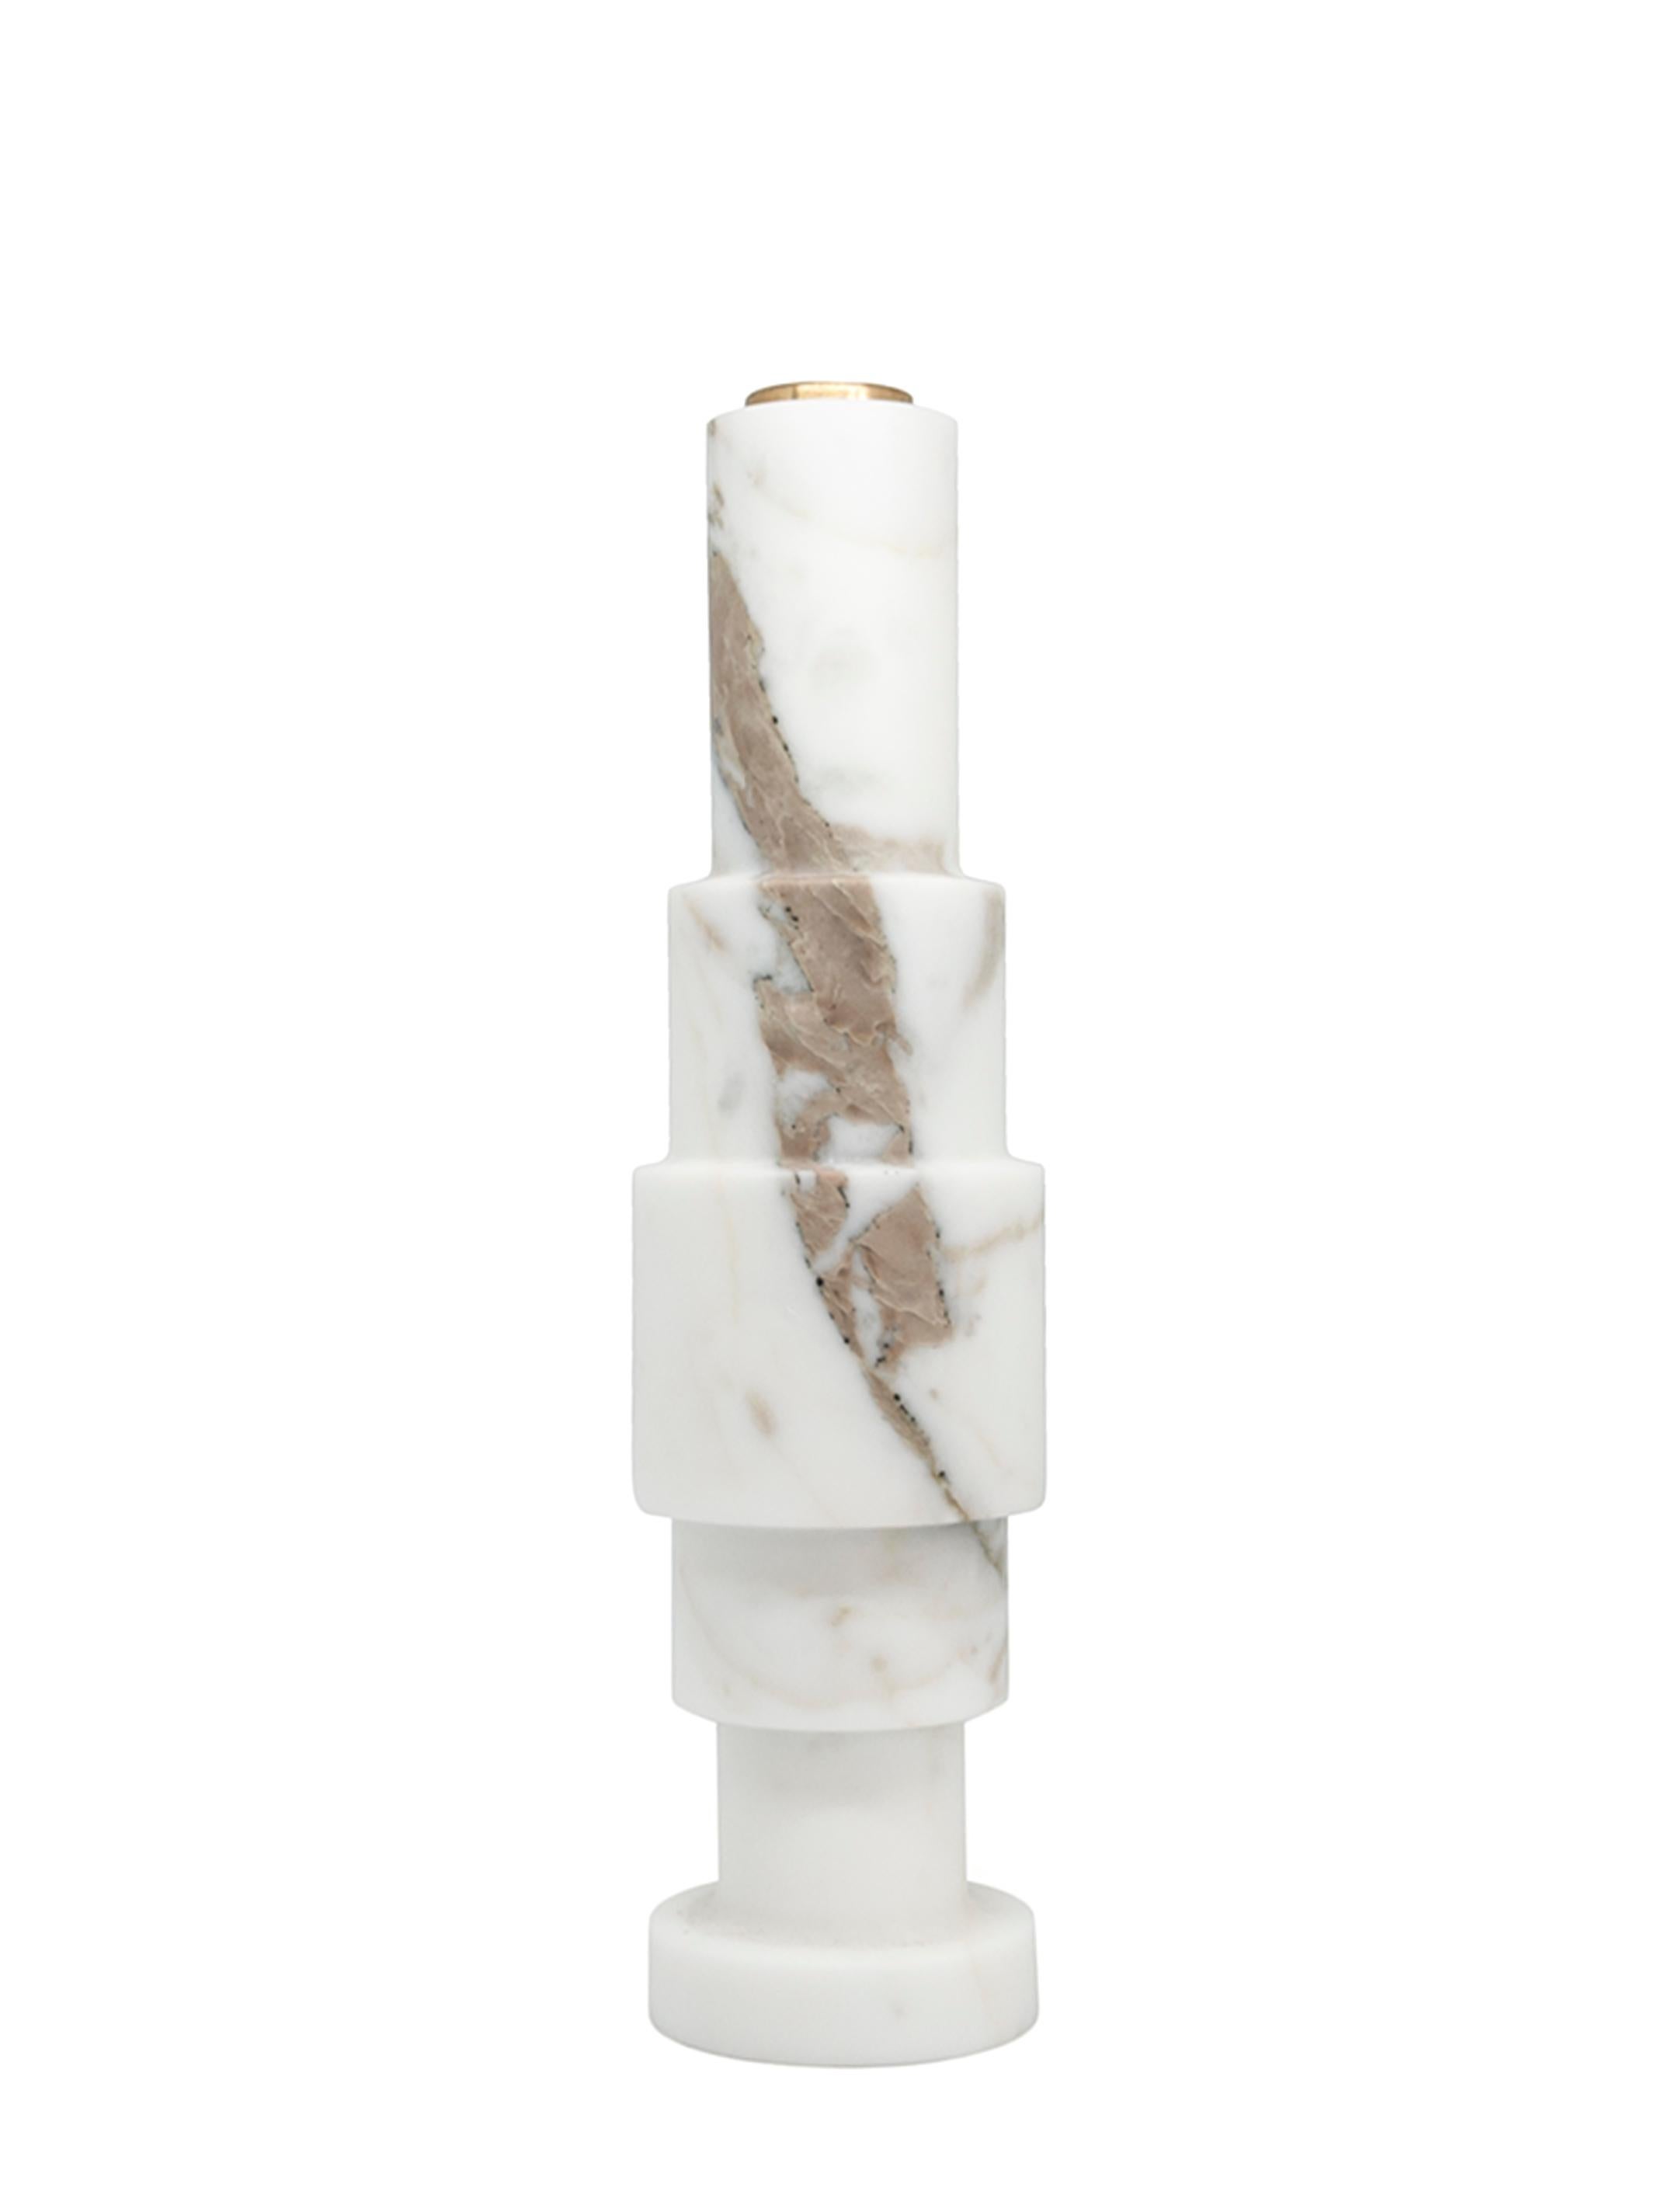 High squared unicolor candleholder in white Carrara marble and brass.
- Jacopo Simonetti design for FiammettaV-
Each piece is in a way unique (every marble block is different in veins and shades) and handmade by Italian artisans specialized over